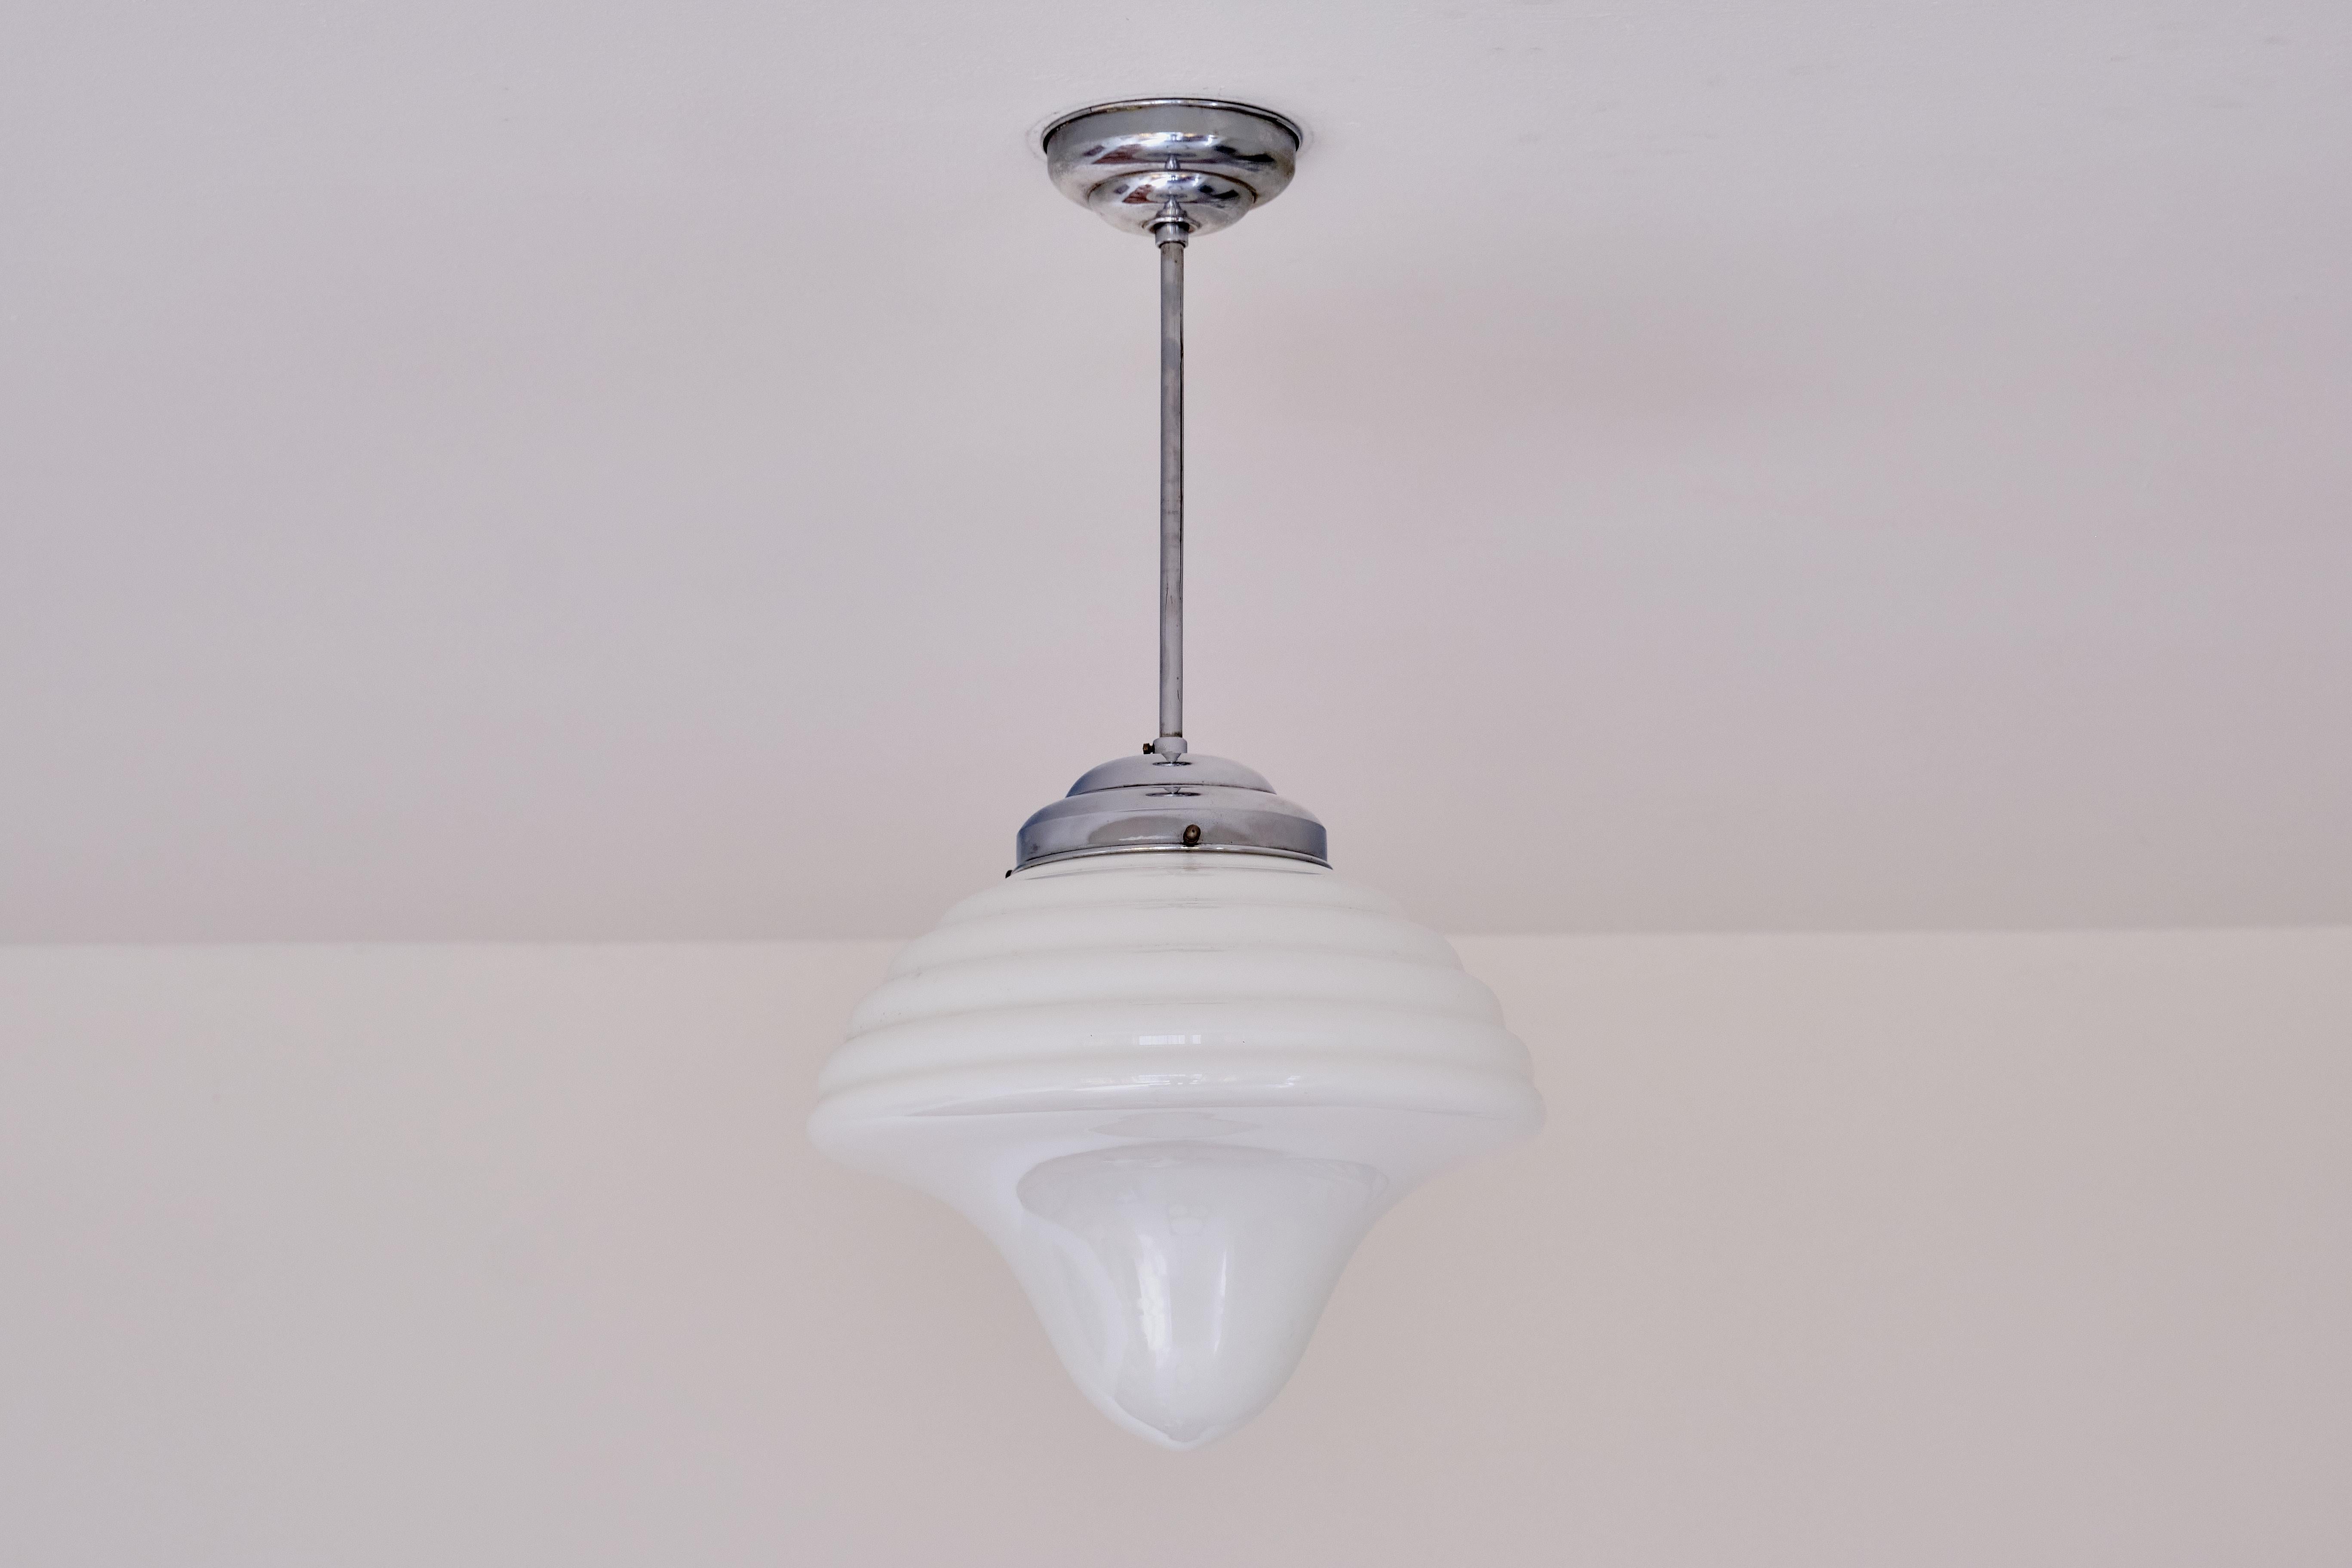 Art Deco Drop Shaped Pendant Light in Opal Glass and Nickel, Netherlands, 1930s For Sale 4